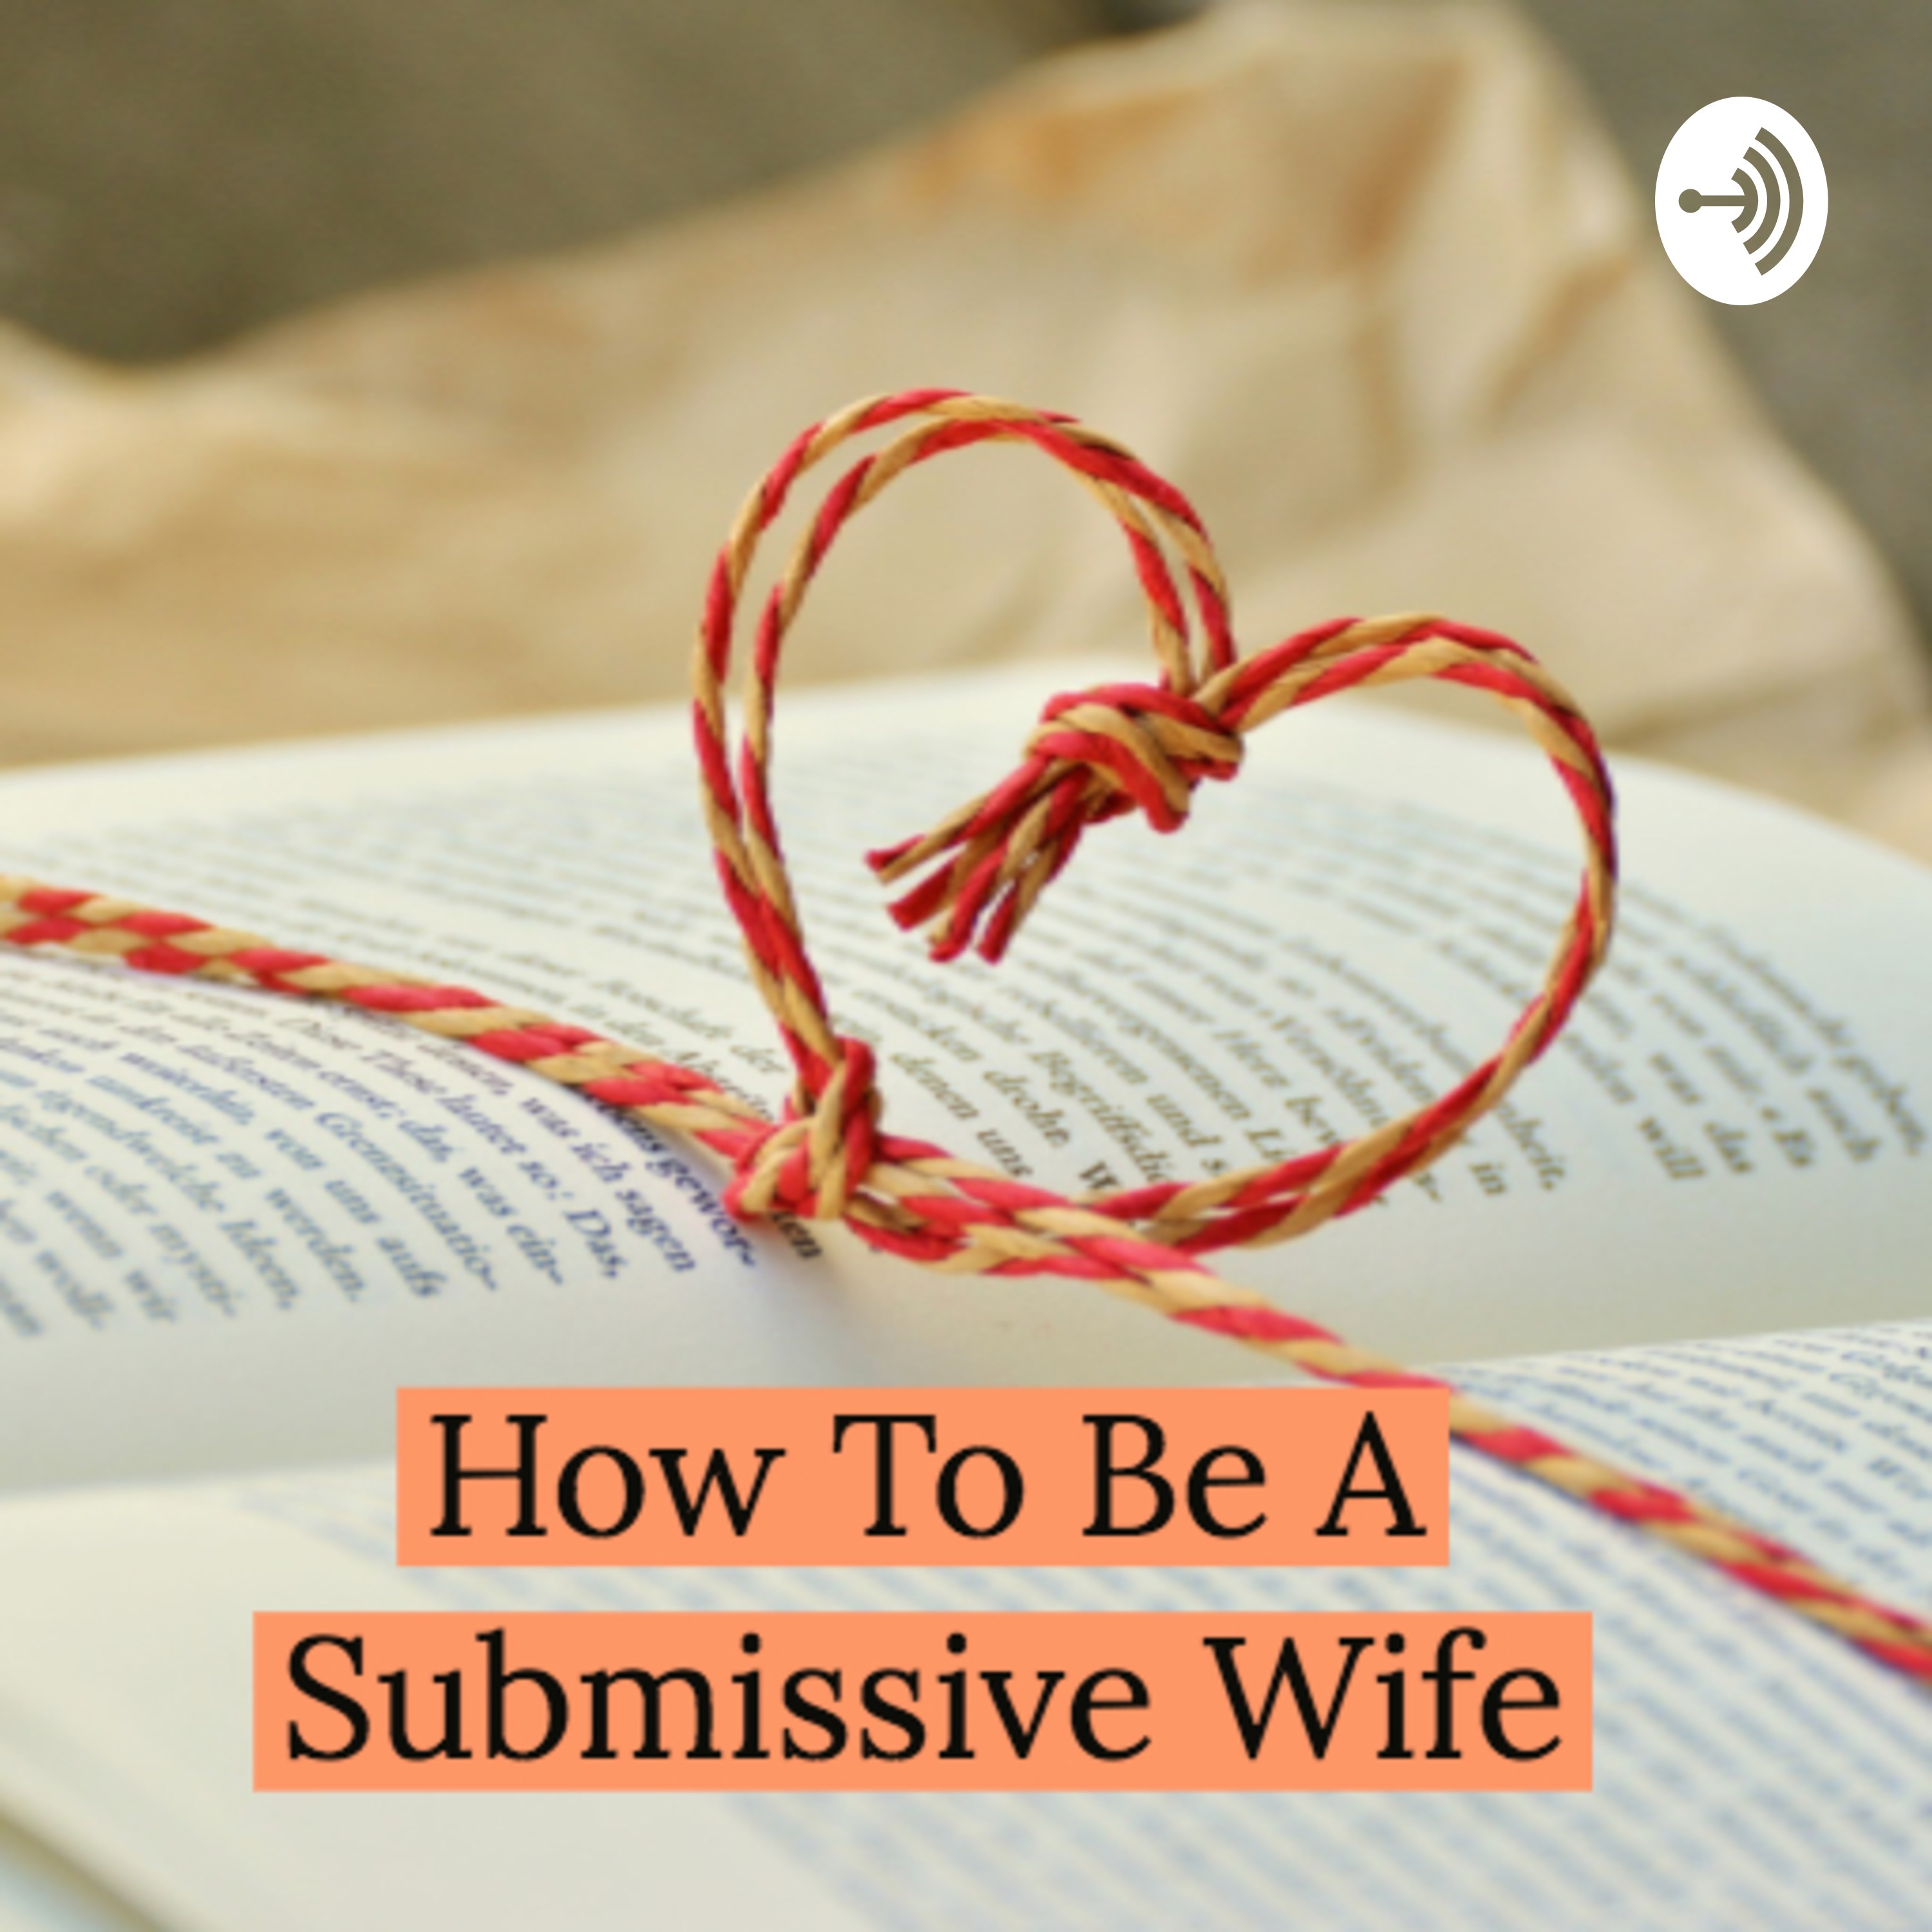 Five Ways To Enjoy Giving Oral Sex To Your Husband How To Be A Submissive Wife Podcast Podtail